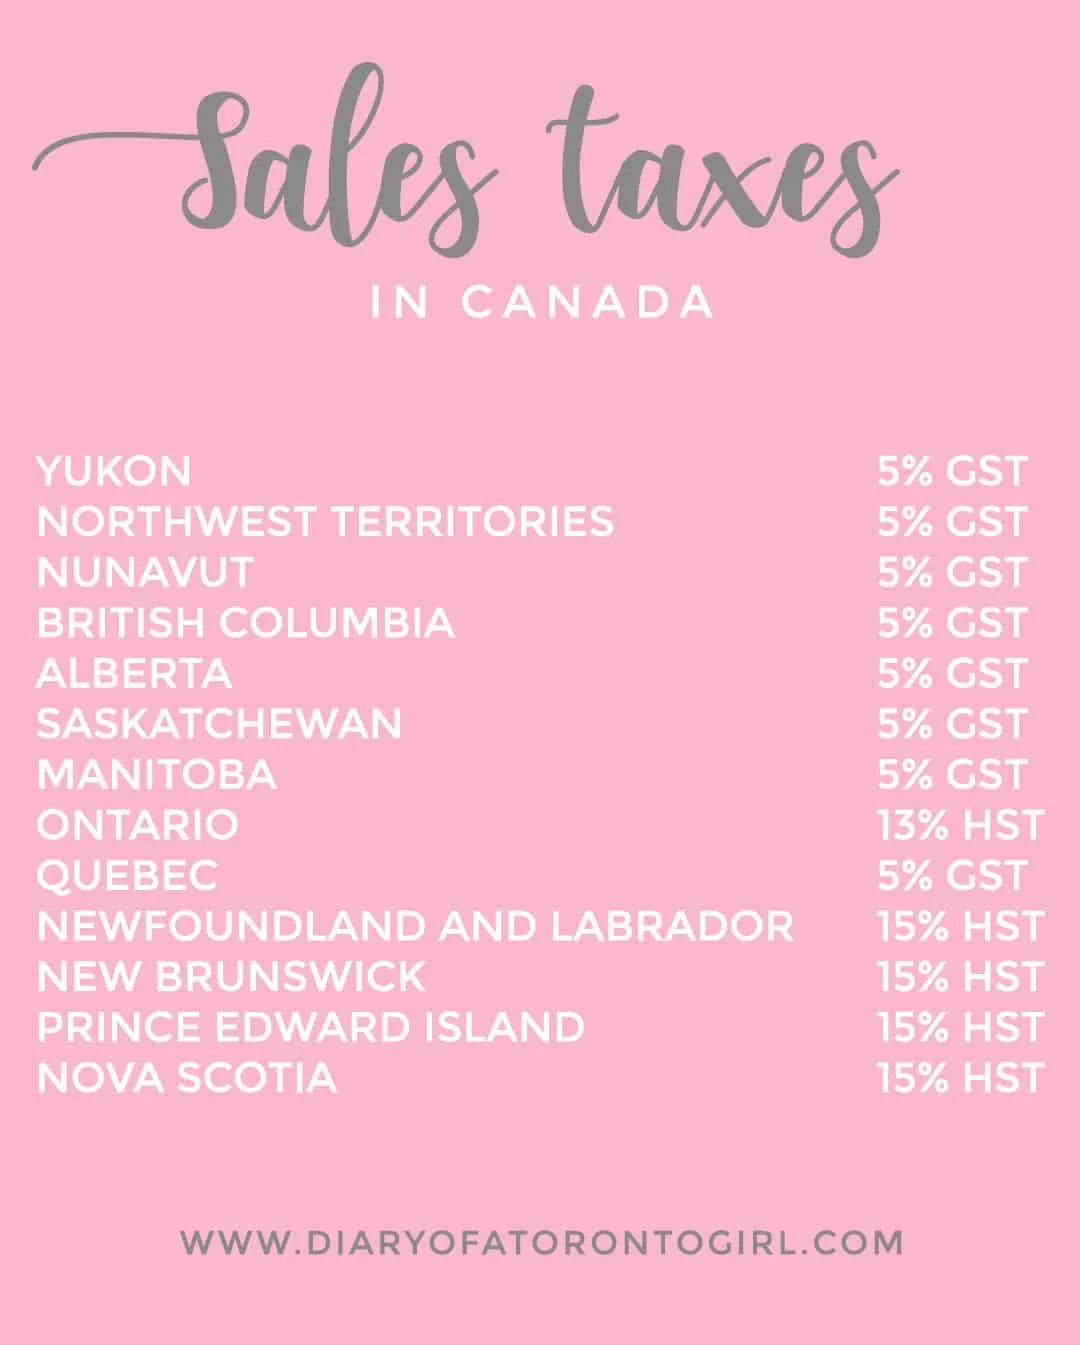 Sales tax rates per province and territory in Canada